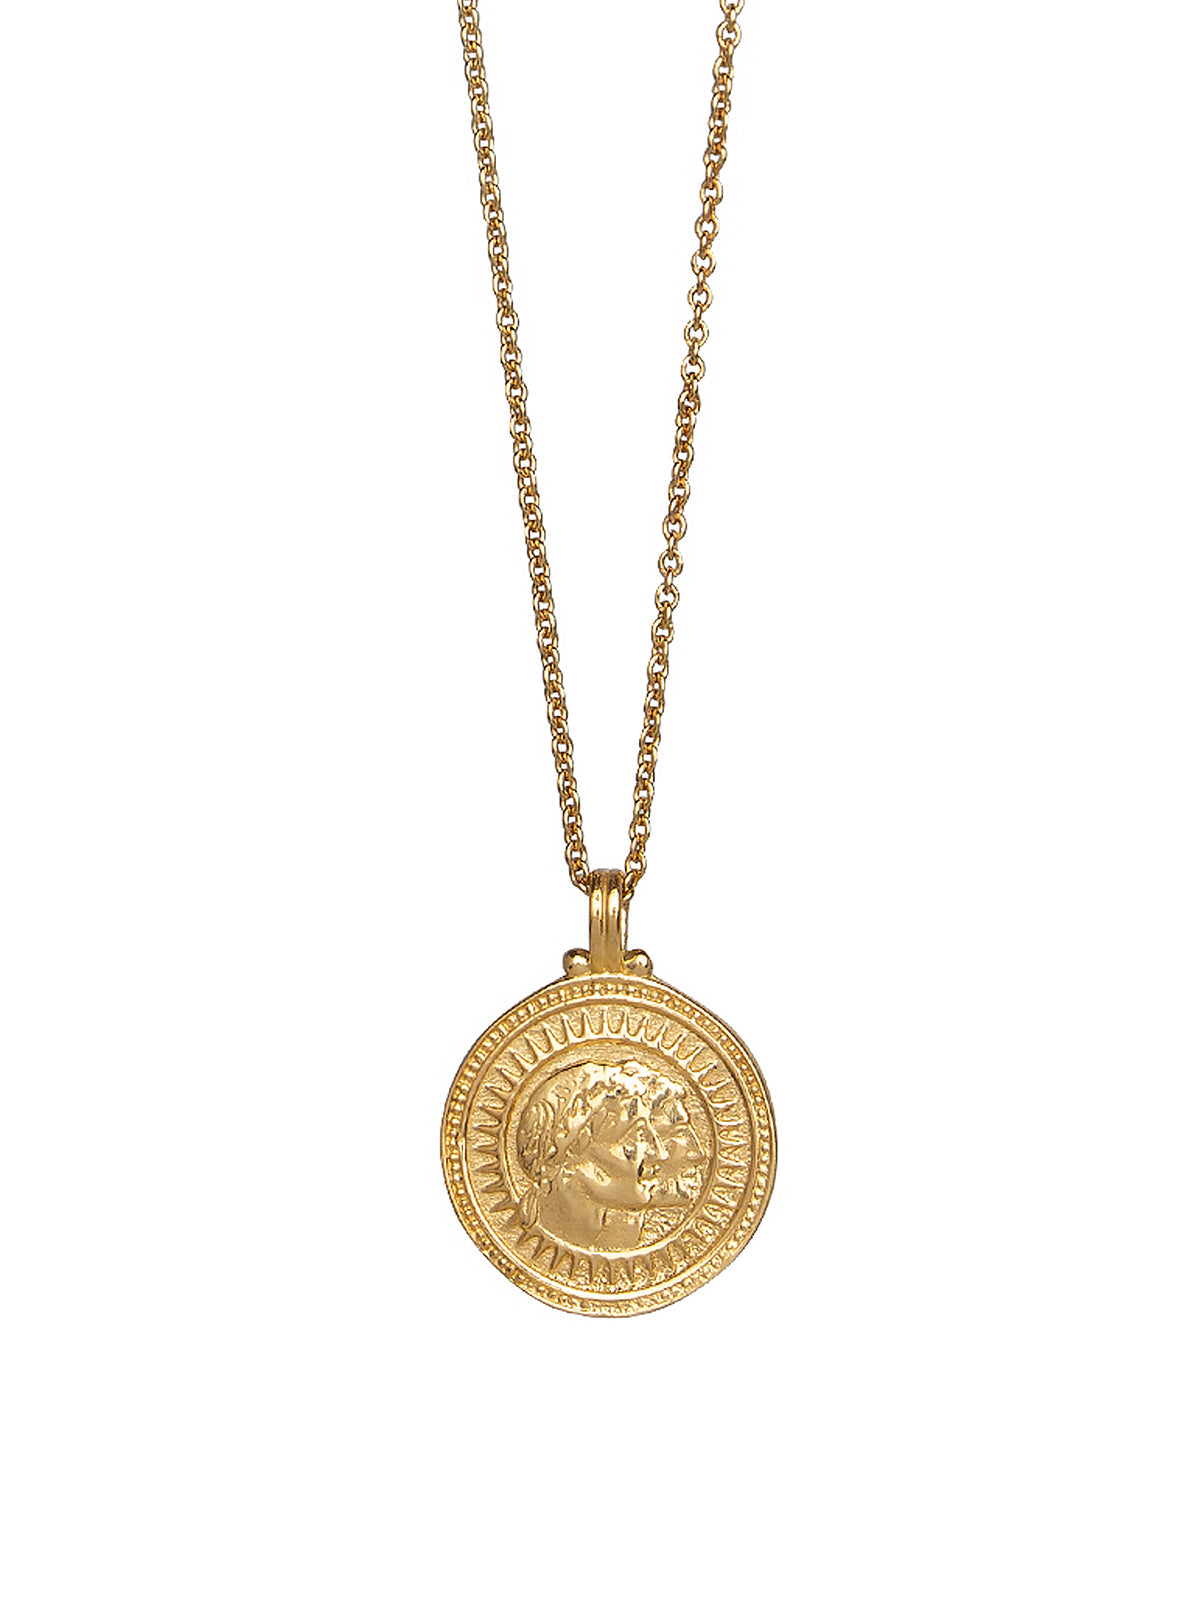 Gemini. 18ct Solid Gold Star Sign Necklace. The pendant features an Evil Eye on the back to ward off any naughty behavior aimed at you, Our logo and the 750 Hallmark for 18ct Gold.